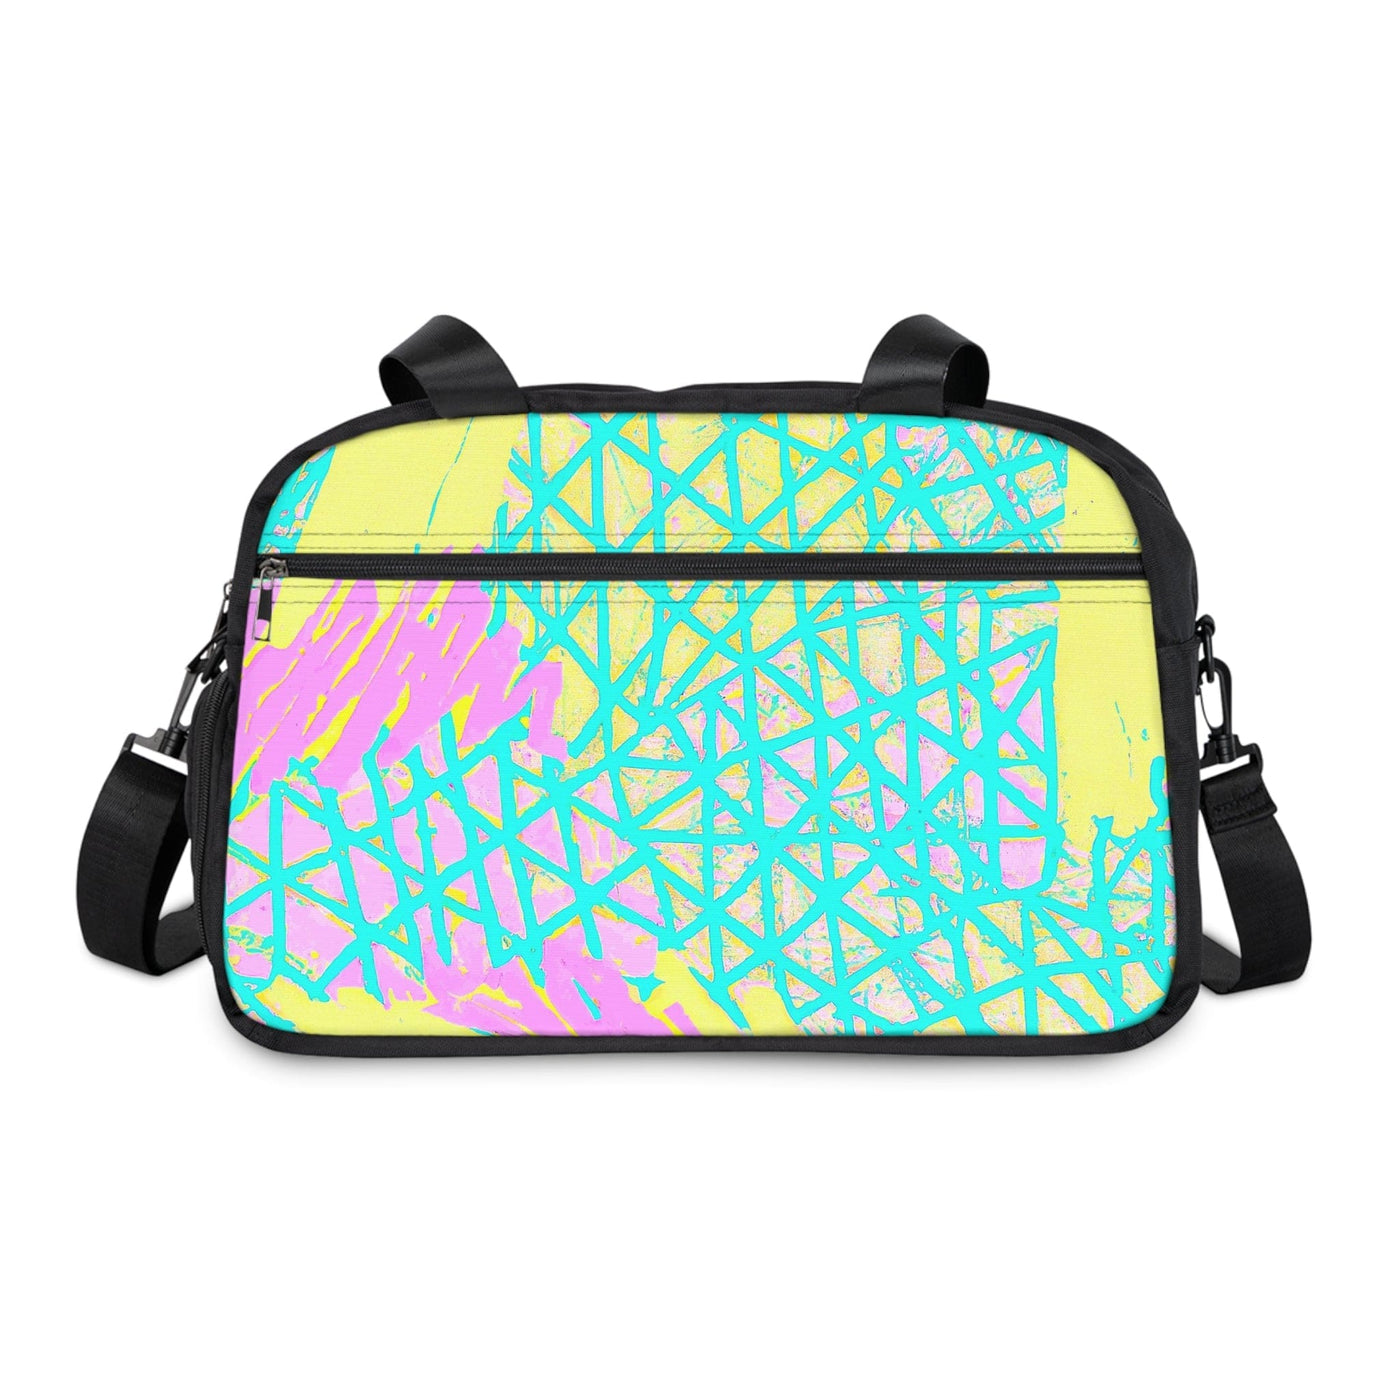 Travel Fitness Bag Cyan Blue Lime Green And Pink Pattern - Bags